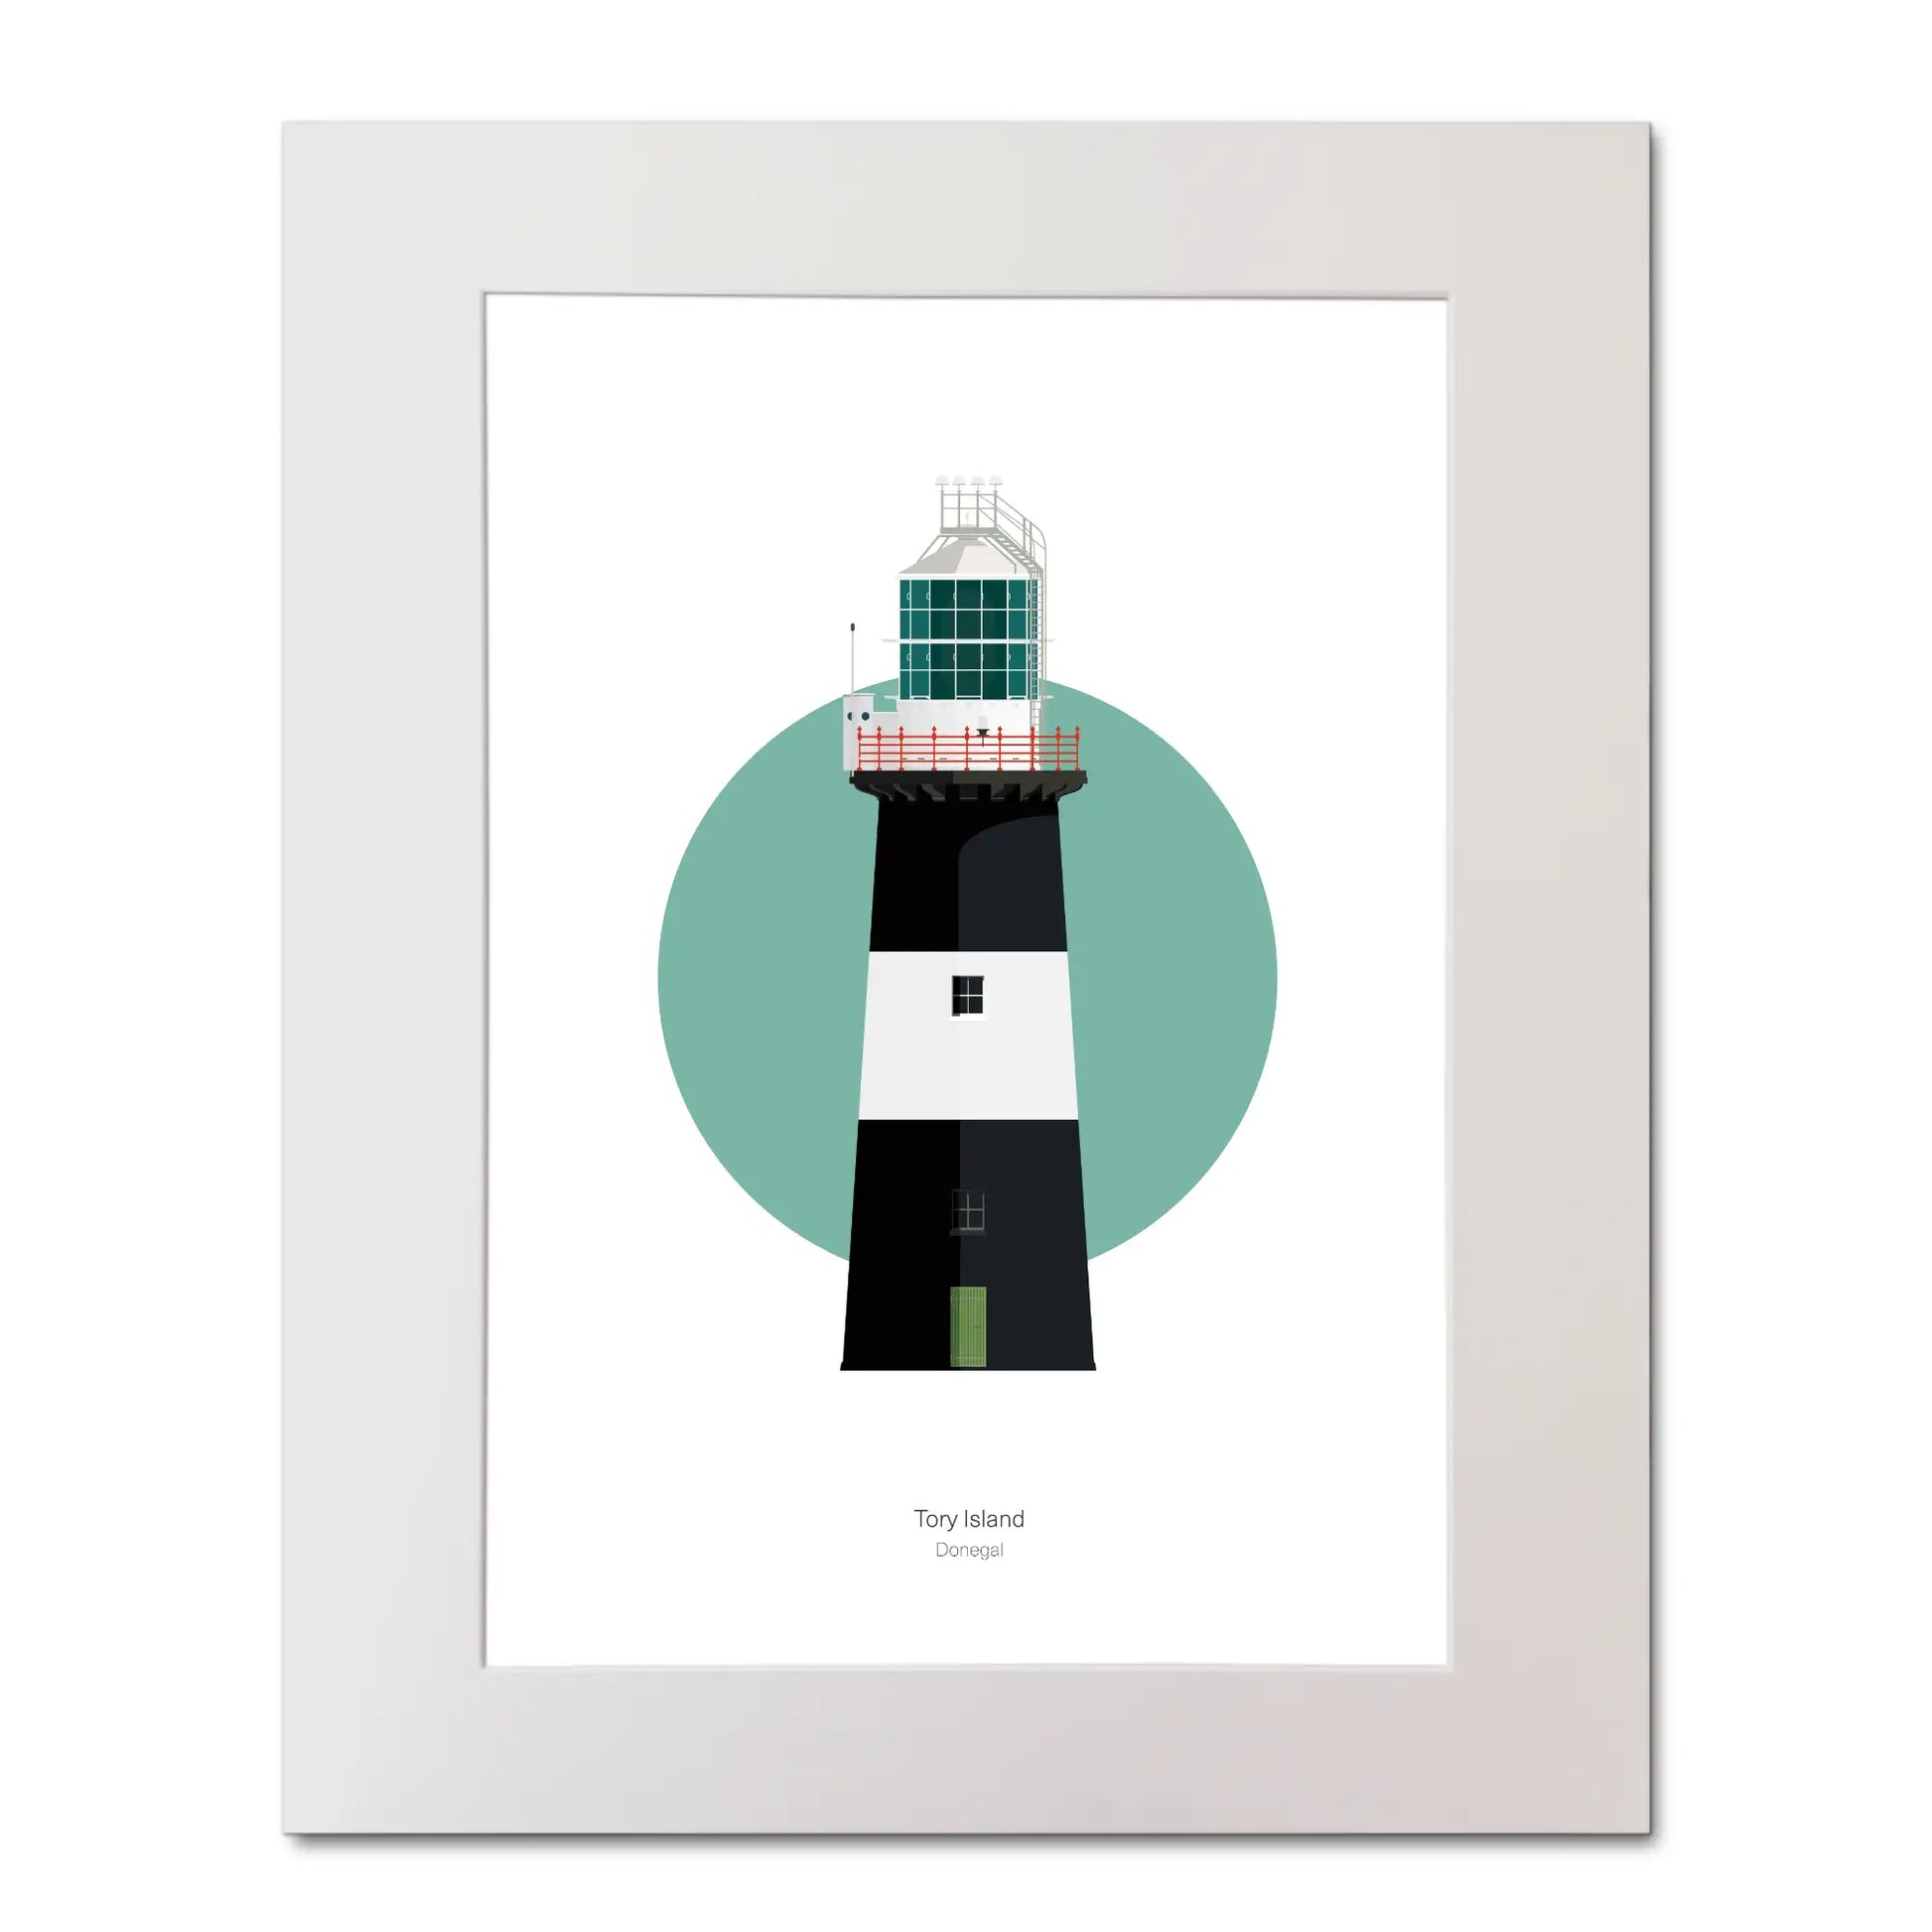 Illustration of Tory Island lighthouse on a white background inside light blue square,  in a white frame measuring 40x50cm.